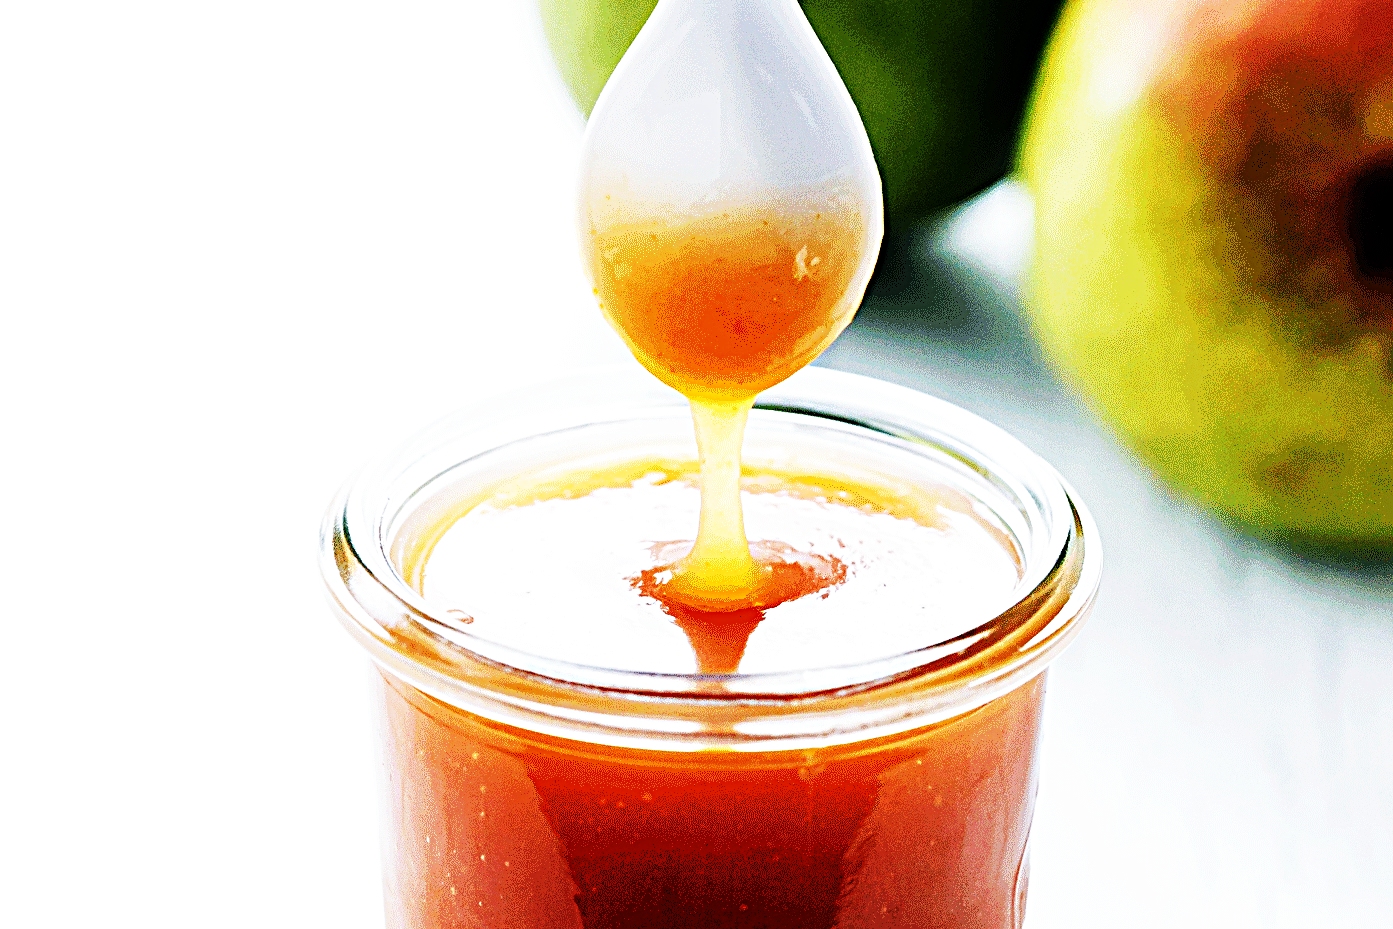 Stupid-Easy Recipe for Pear Caramel Sauce (#1 Top-Rated)